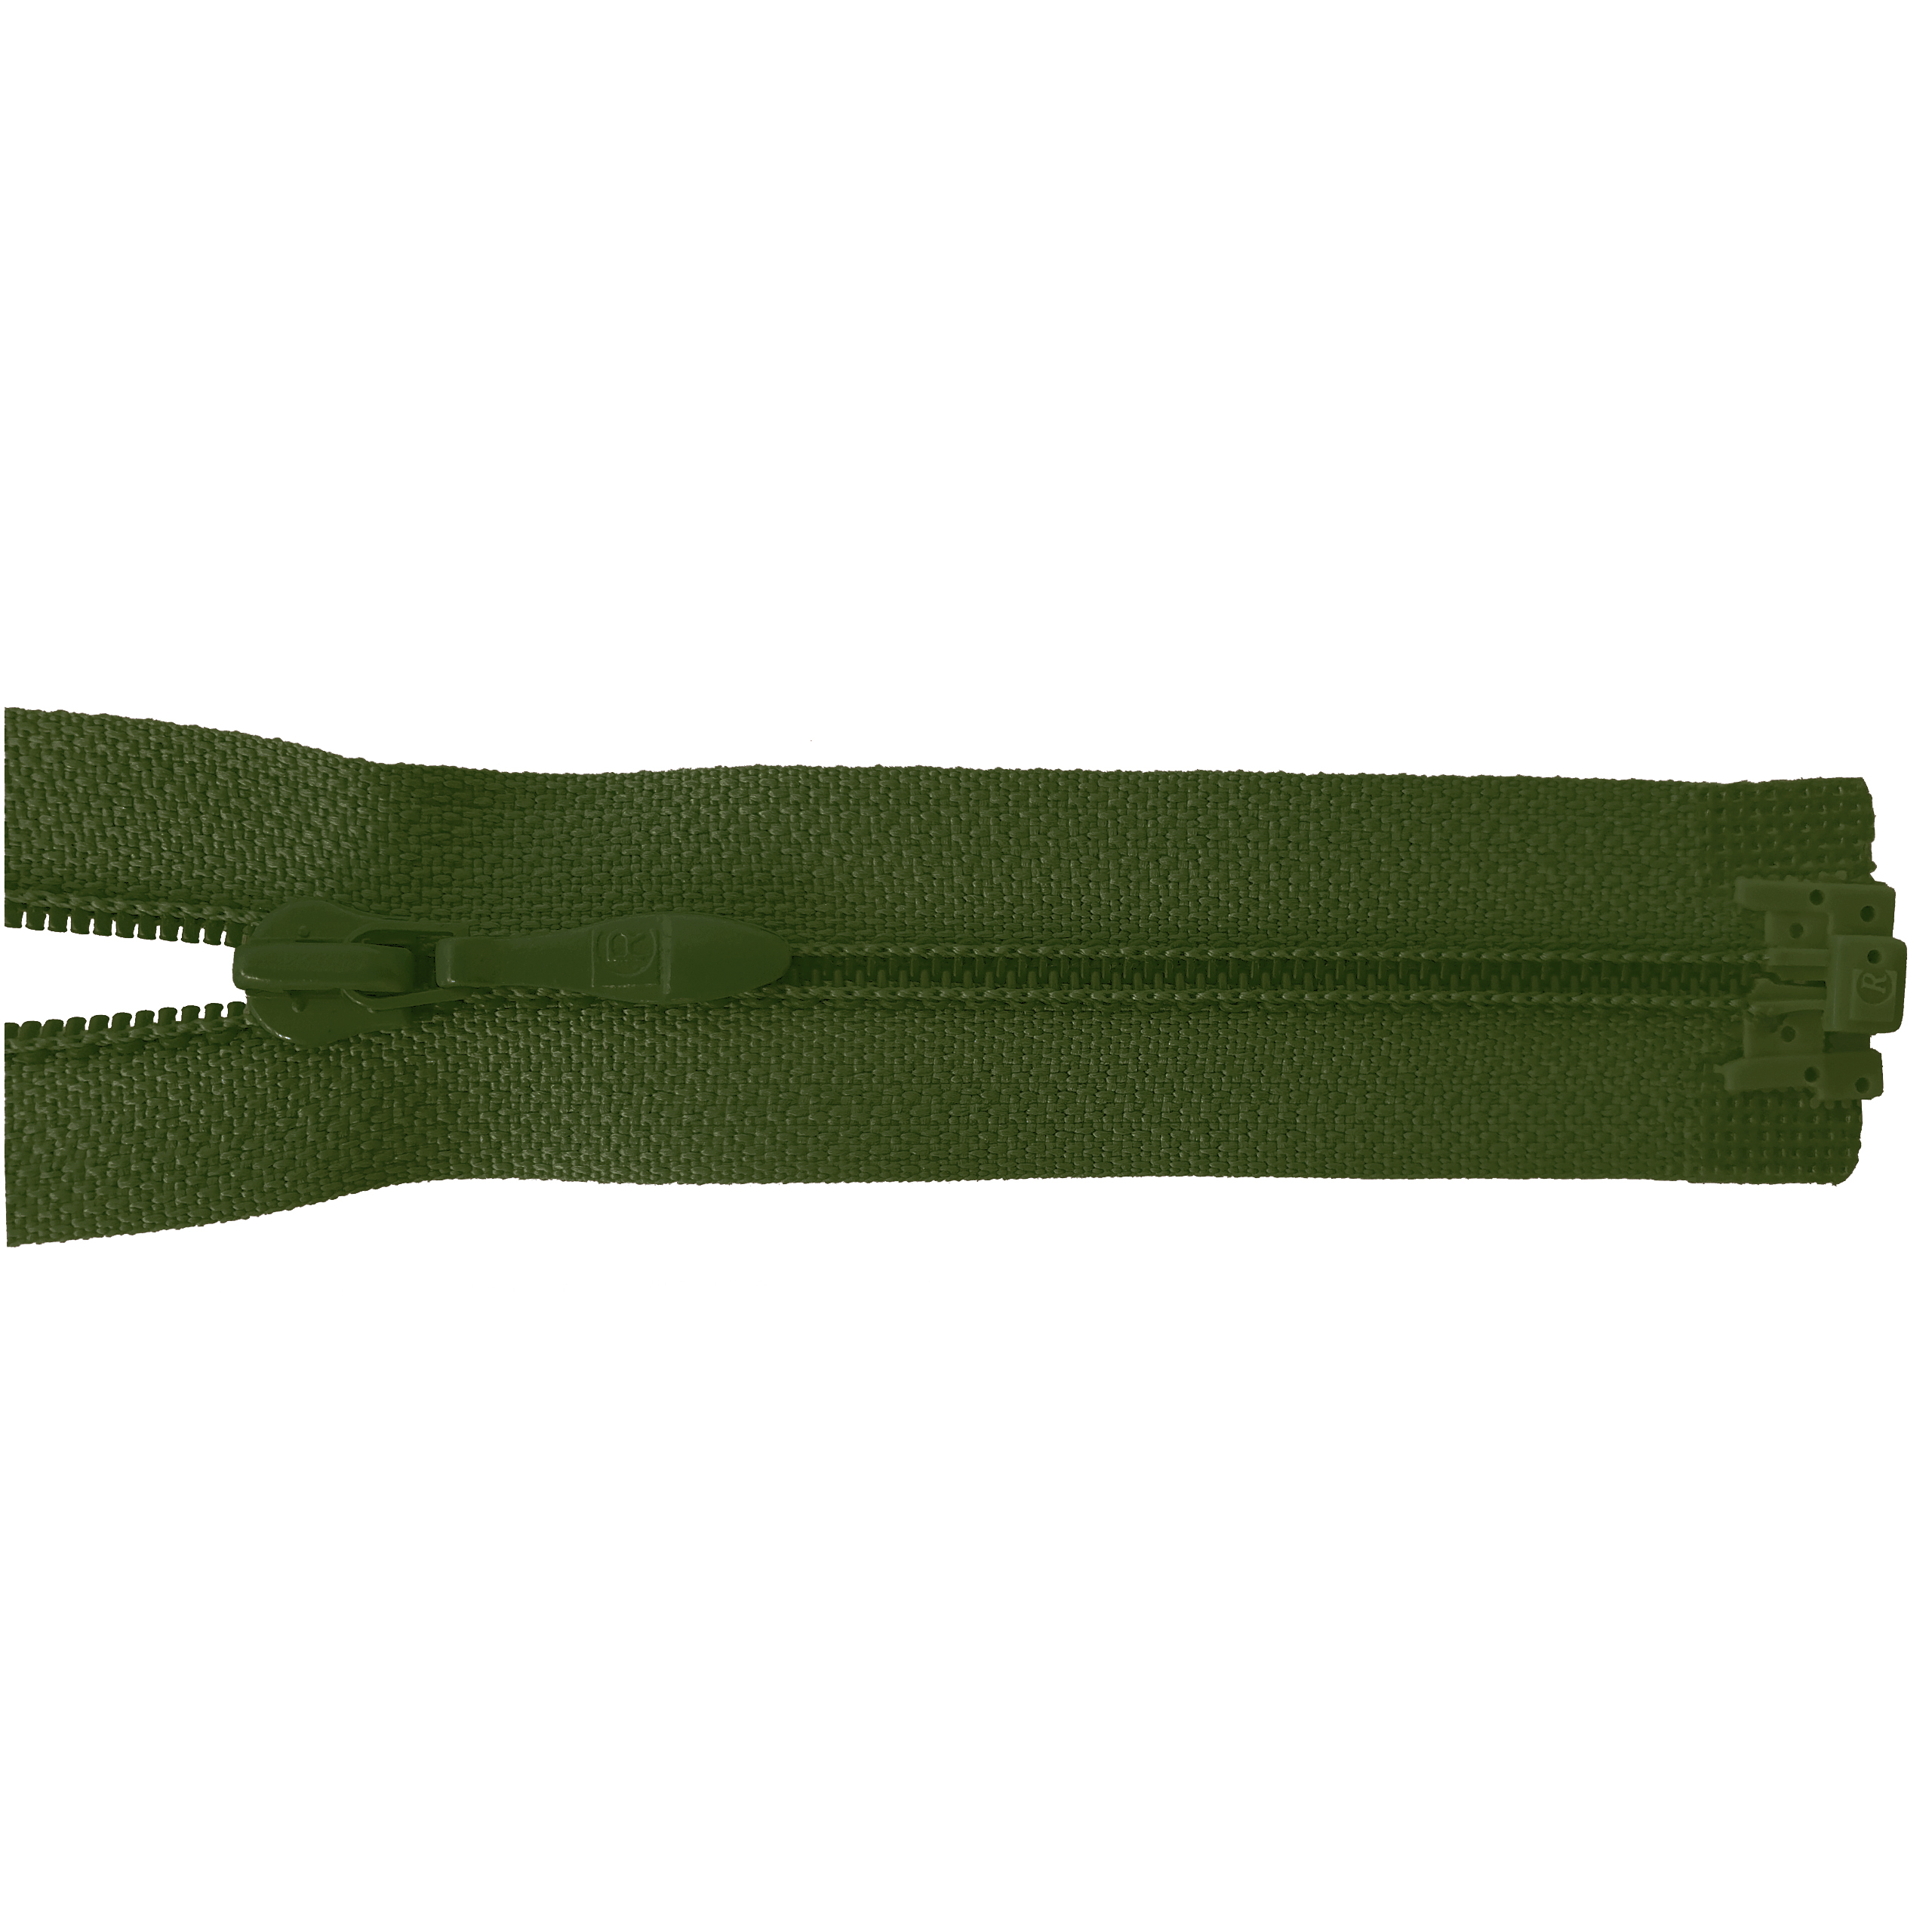 zipper 60cm,divisible, PES spiral, fein, green olive